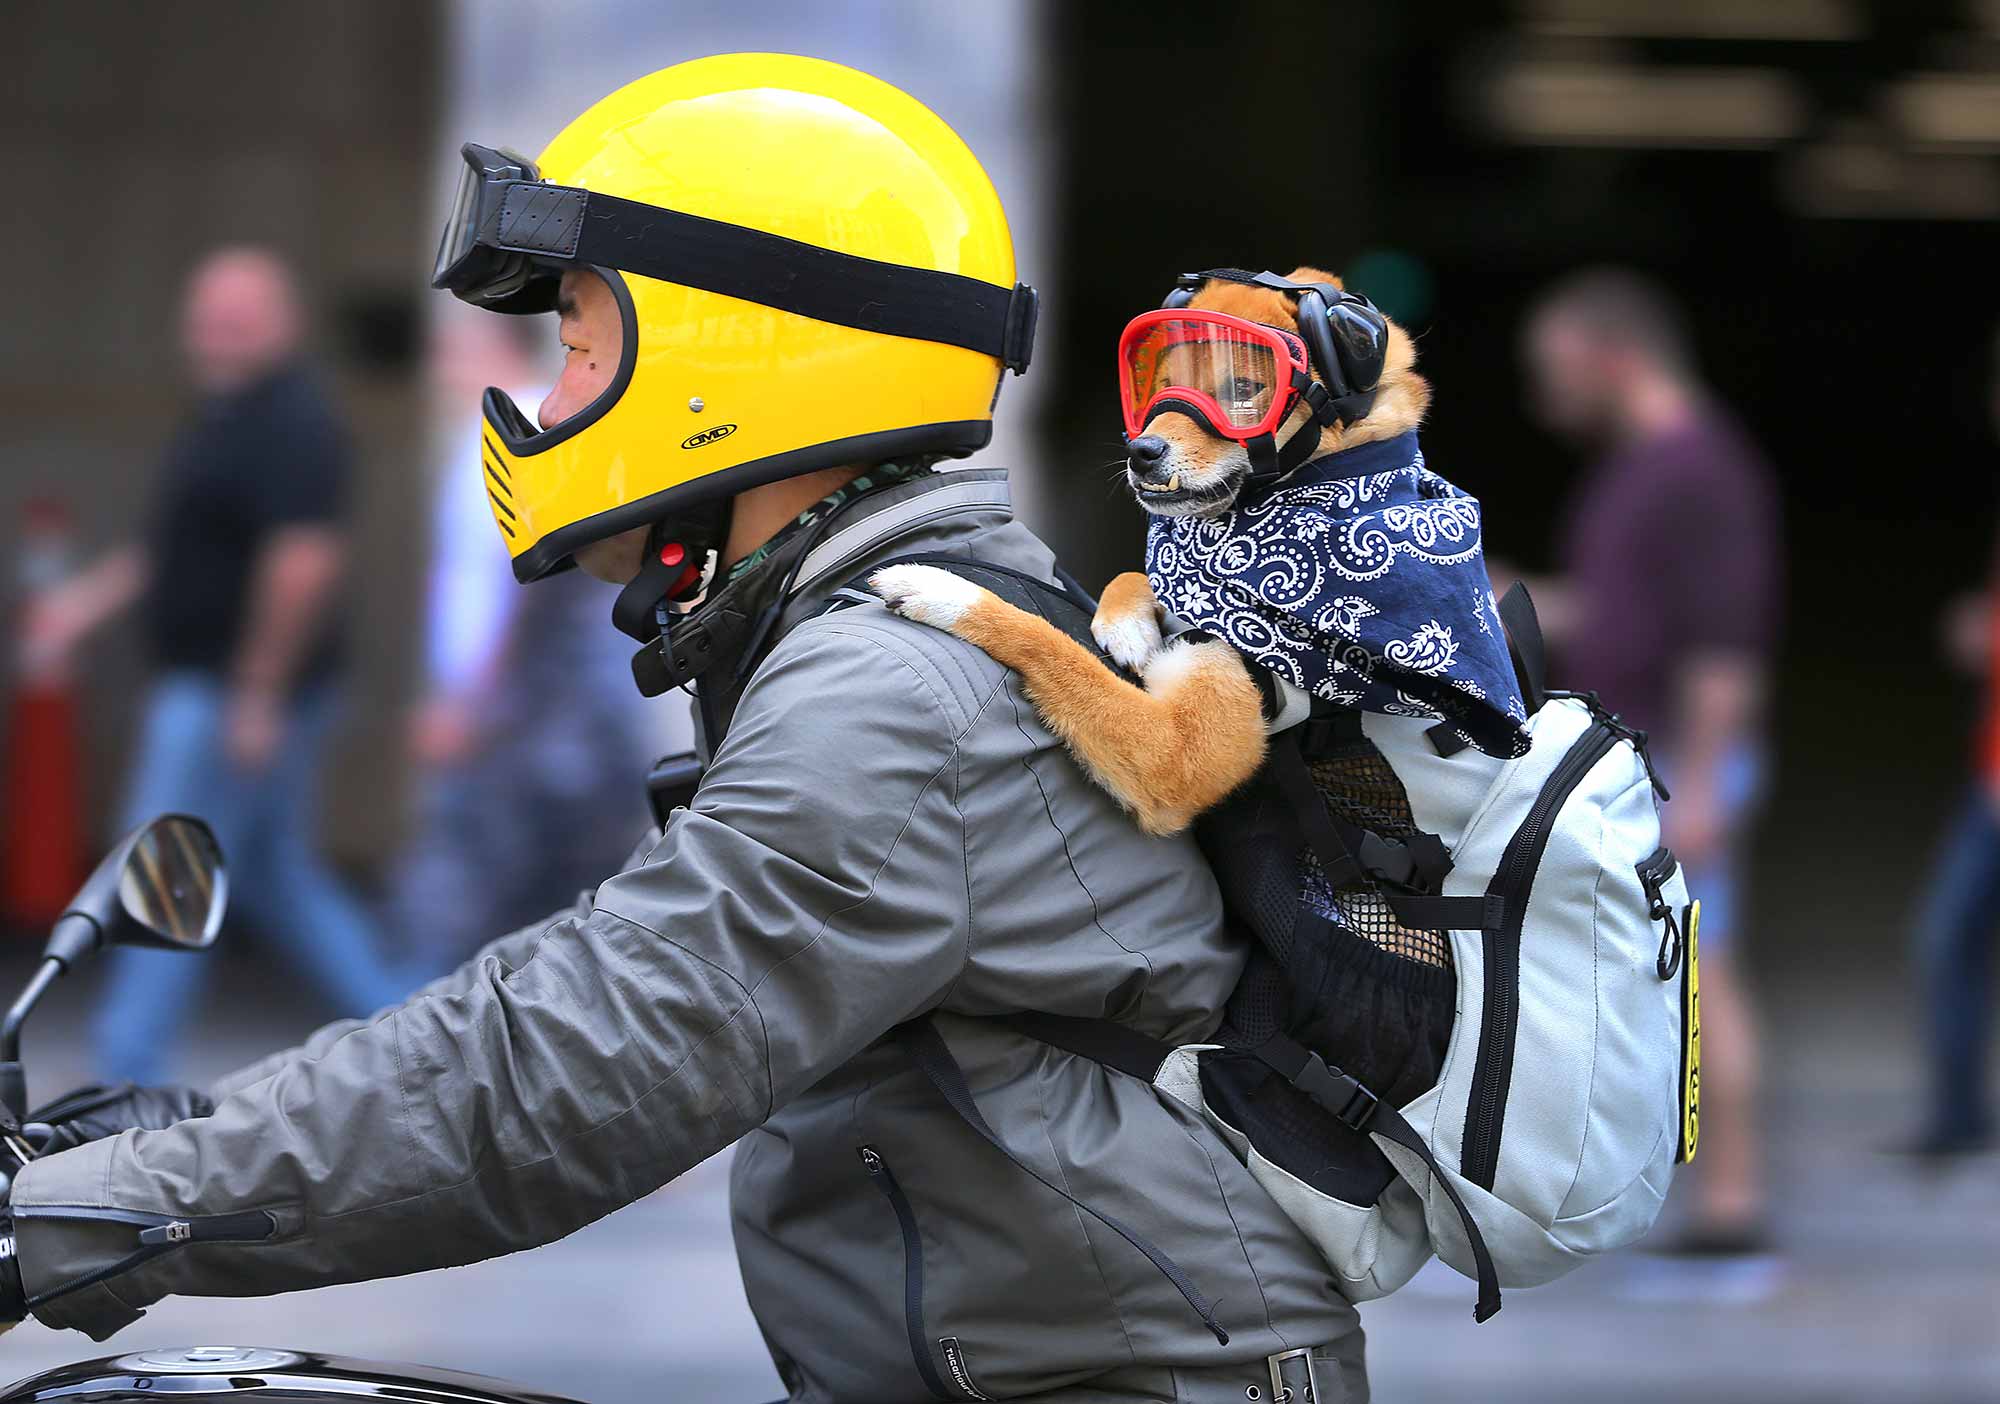 dog in backpack riding a motorcycle